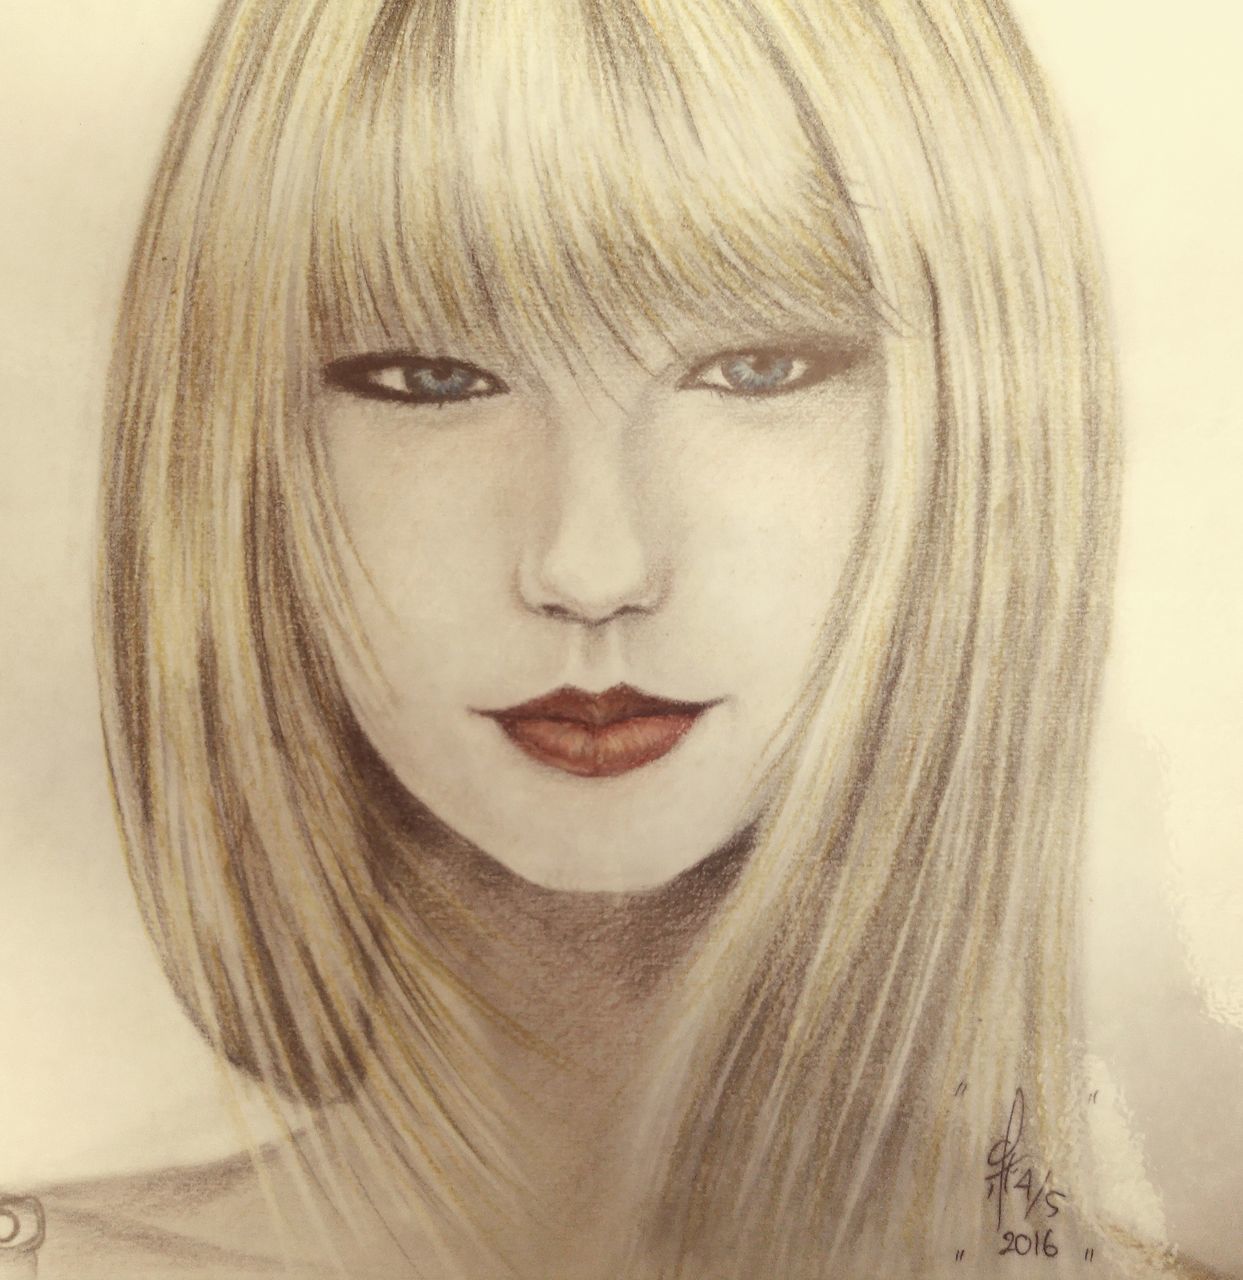 human hair, portrait, blond hair, hairstyle, one person, human face, headshot, long hair, drawing, women, adult, hair color, young adult, sketch, looking at camera, layered hair, nose, bangs, human head, studio shot, close-up, front view, indoors, bob cut, brown hair, fashion, wig, female, serious, human eye